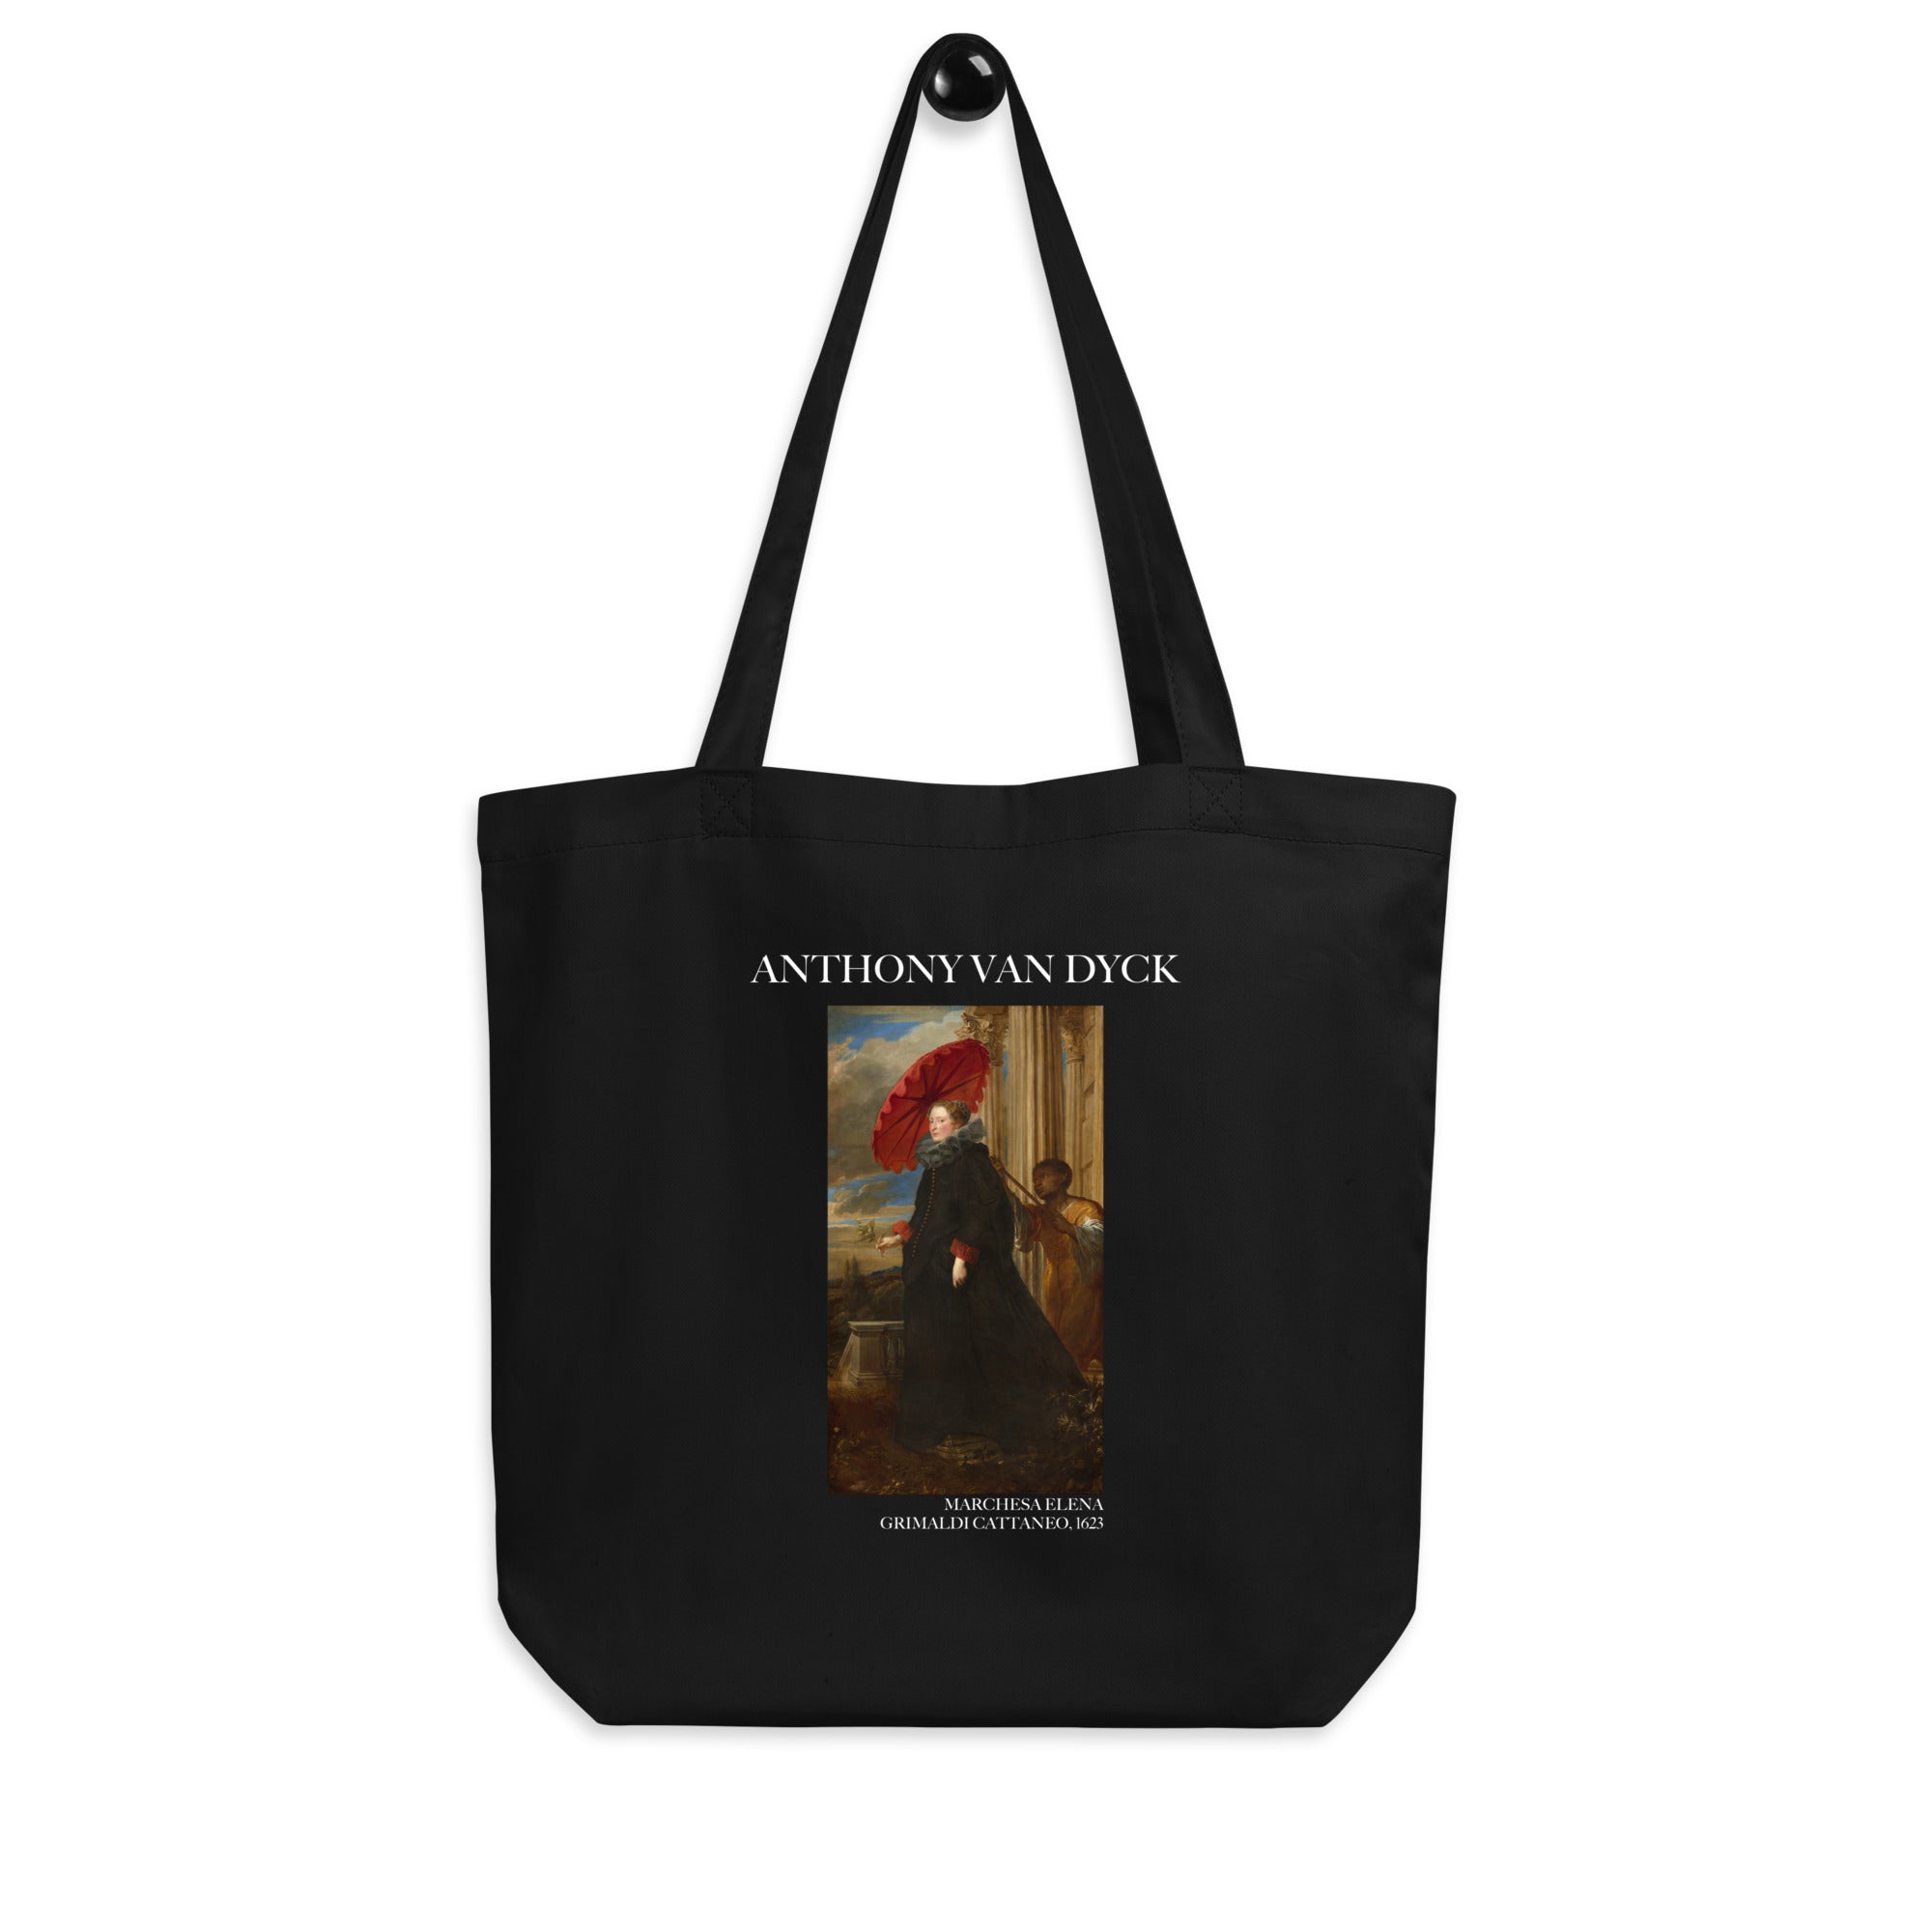 Sir Anthony van Dyck 'Marchesa Elena Grimaldi Cattaneo' Famous Painting Totebag | Eco Friendly Art Tote Bag